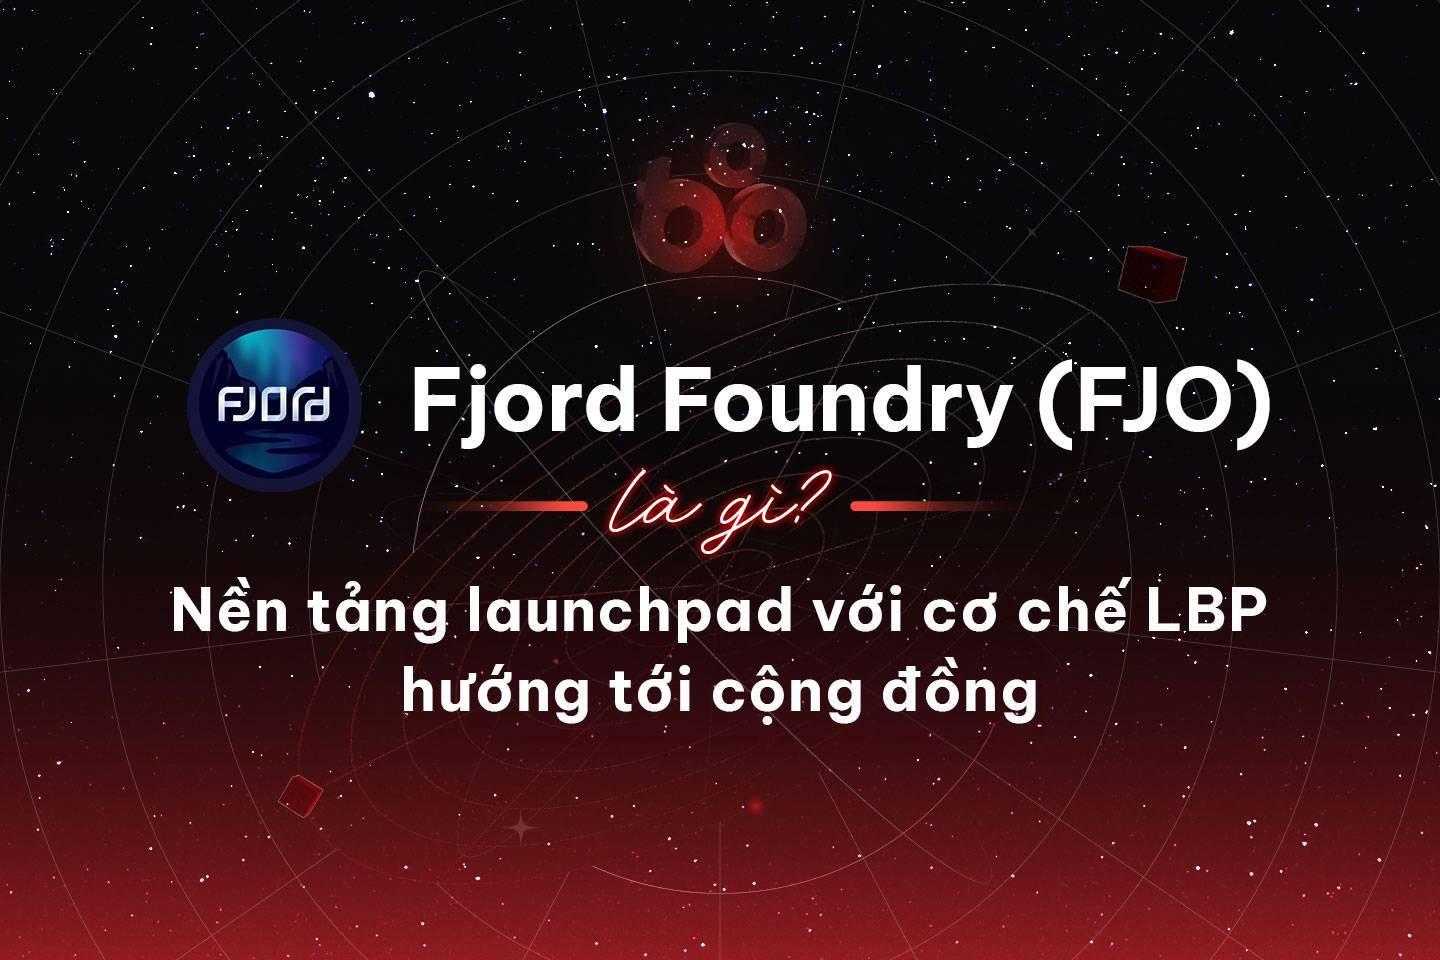 fjord-foundry-fjo-la-gi-nen-tang-launchpad-voi-co-che-lbp-huong-toi-cong-dong